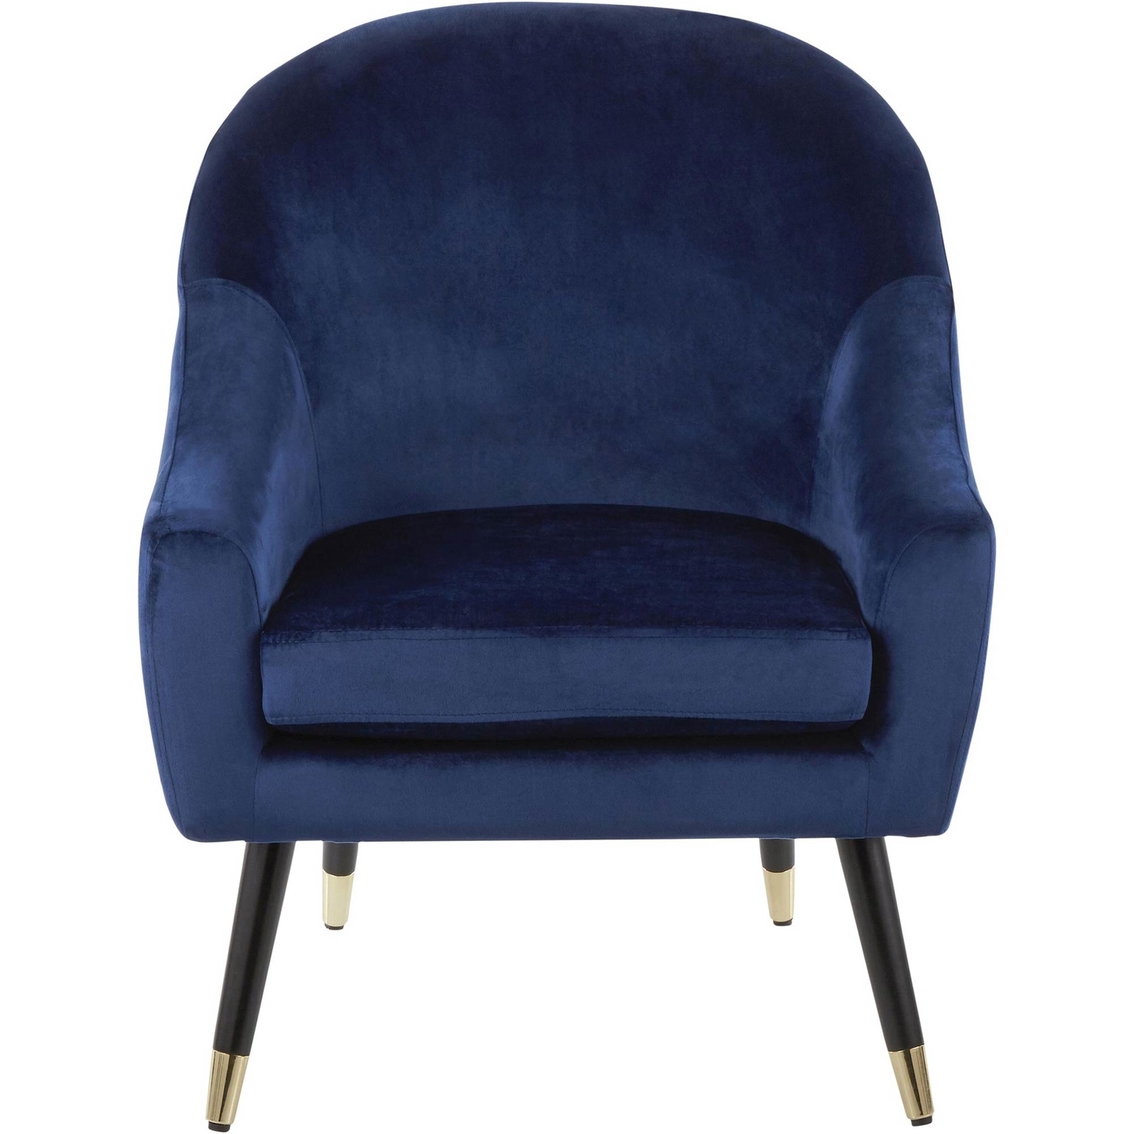 LumiSource Matisse Accent Chair - Image 2 of 6